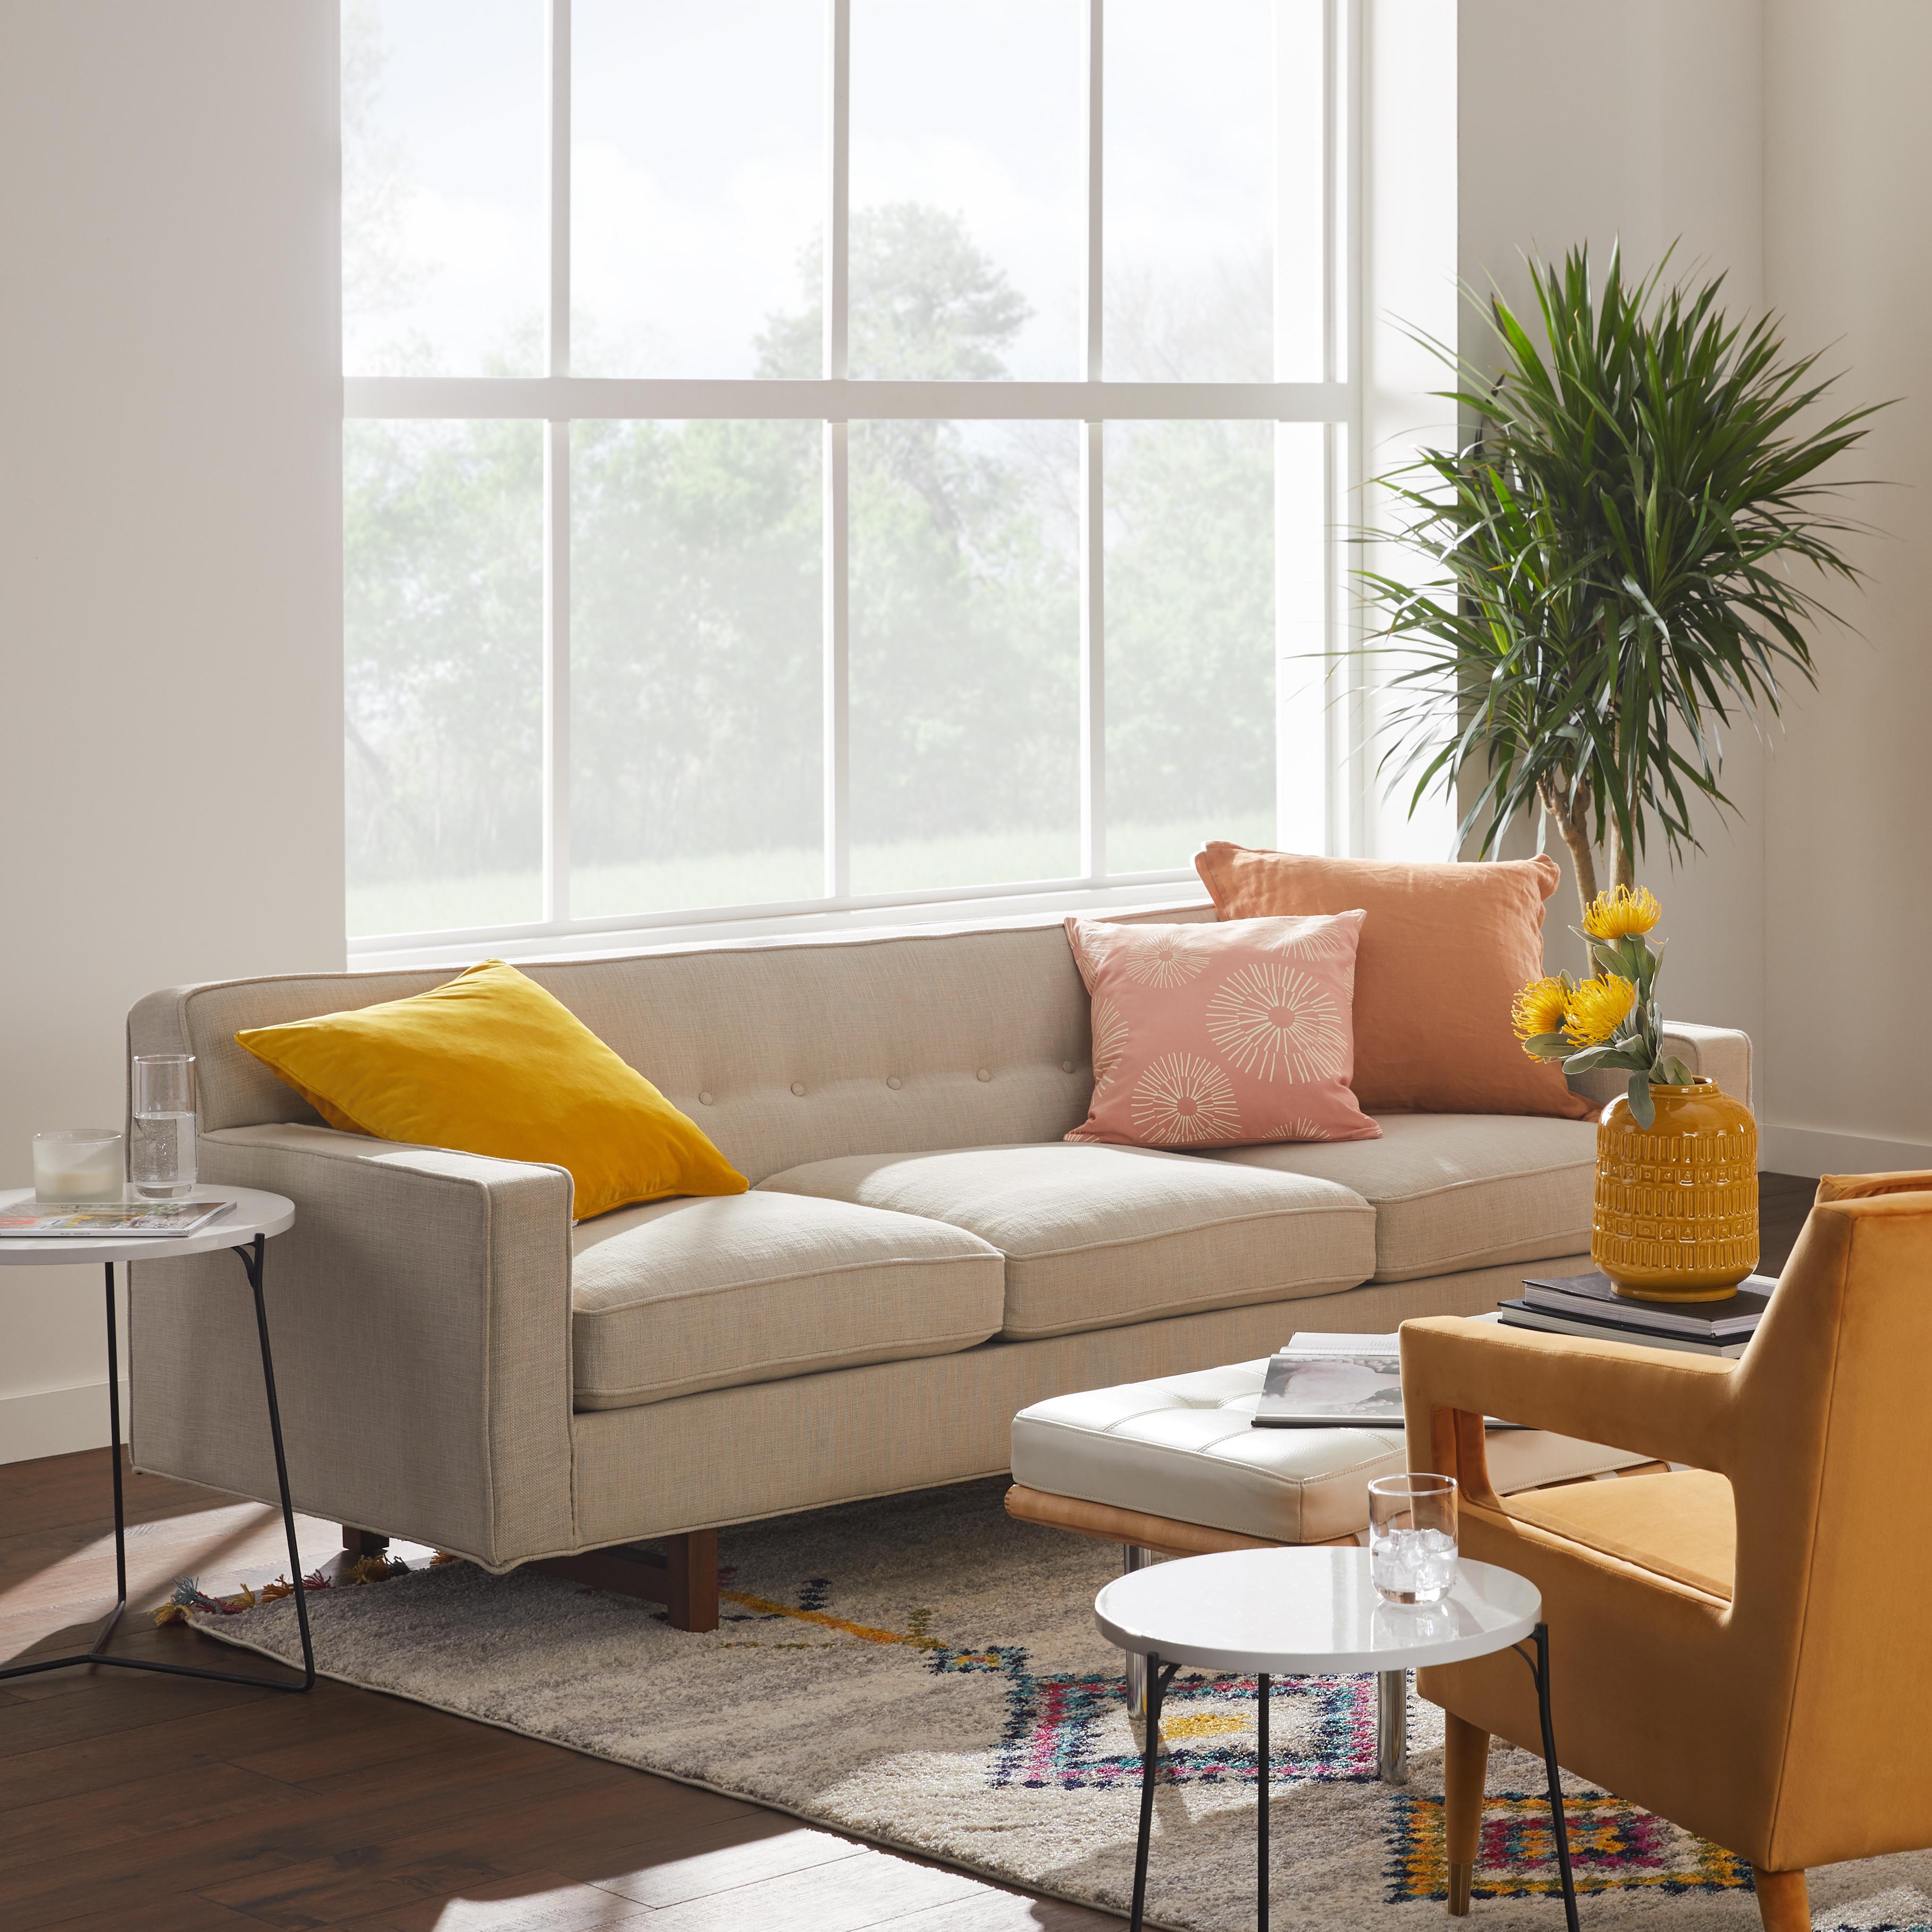 save an extra 15% on Select Furniture*